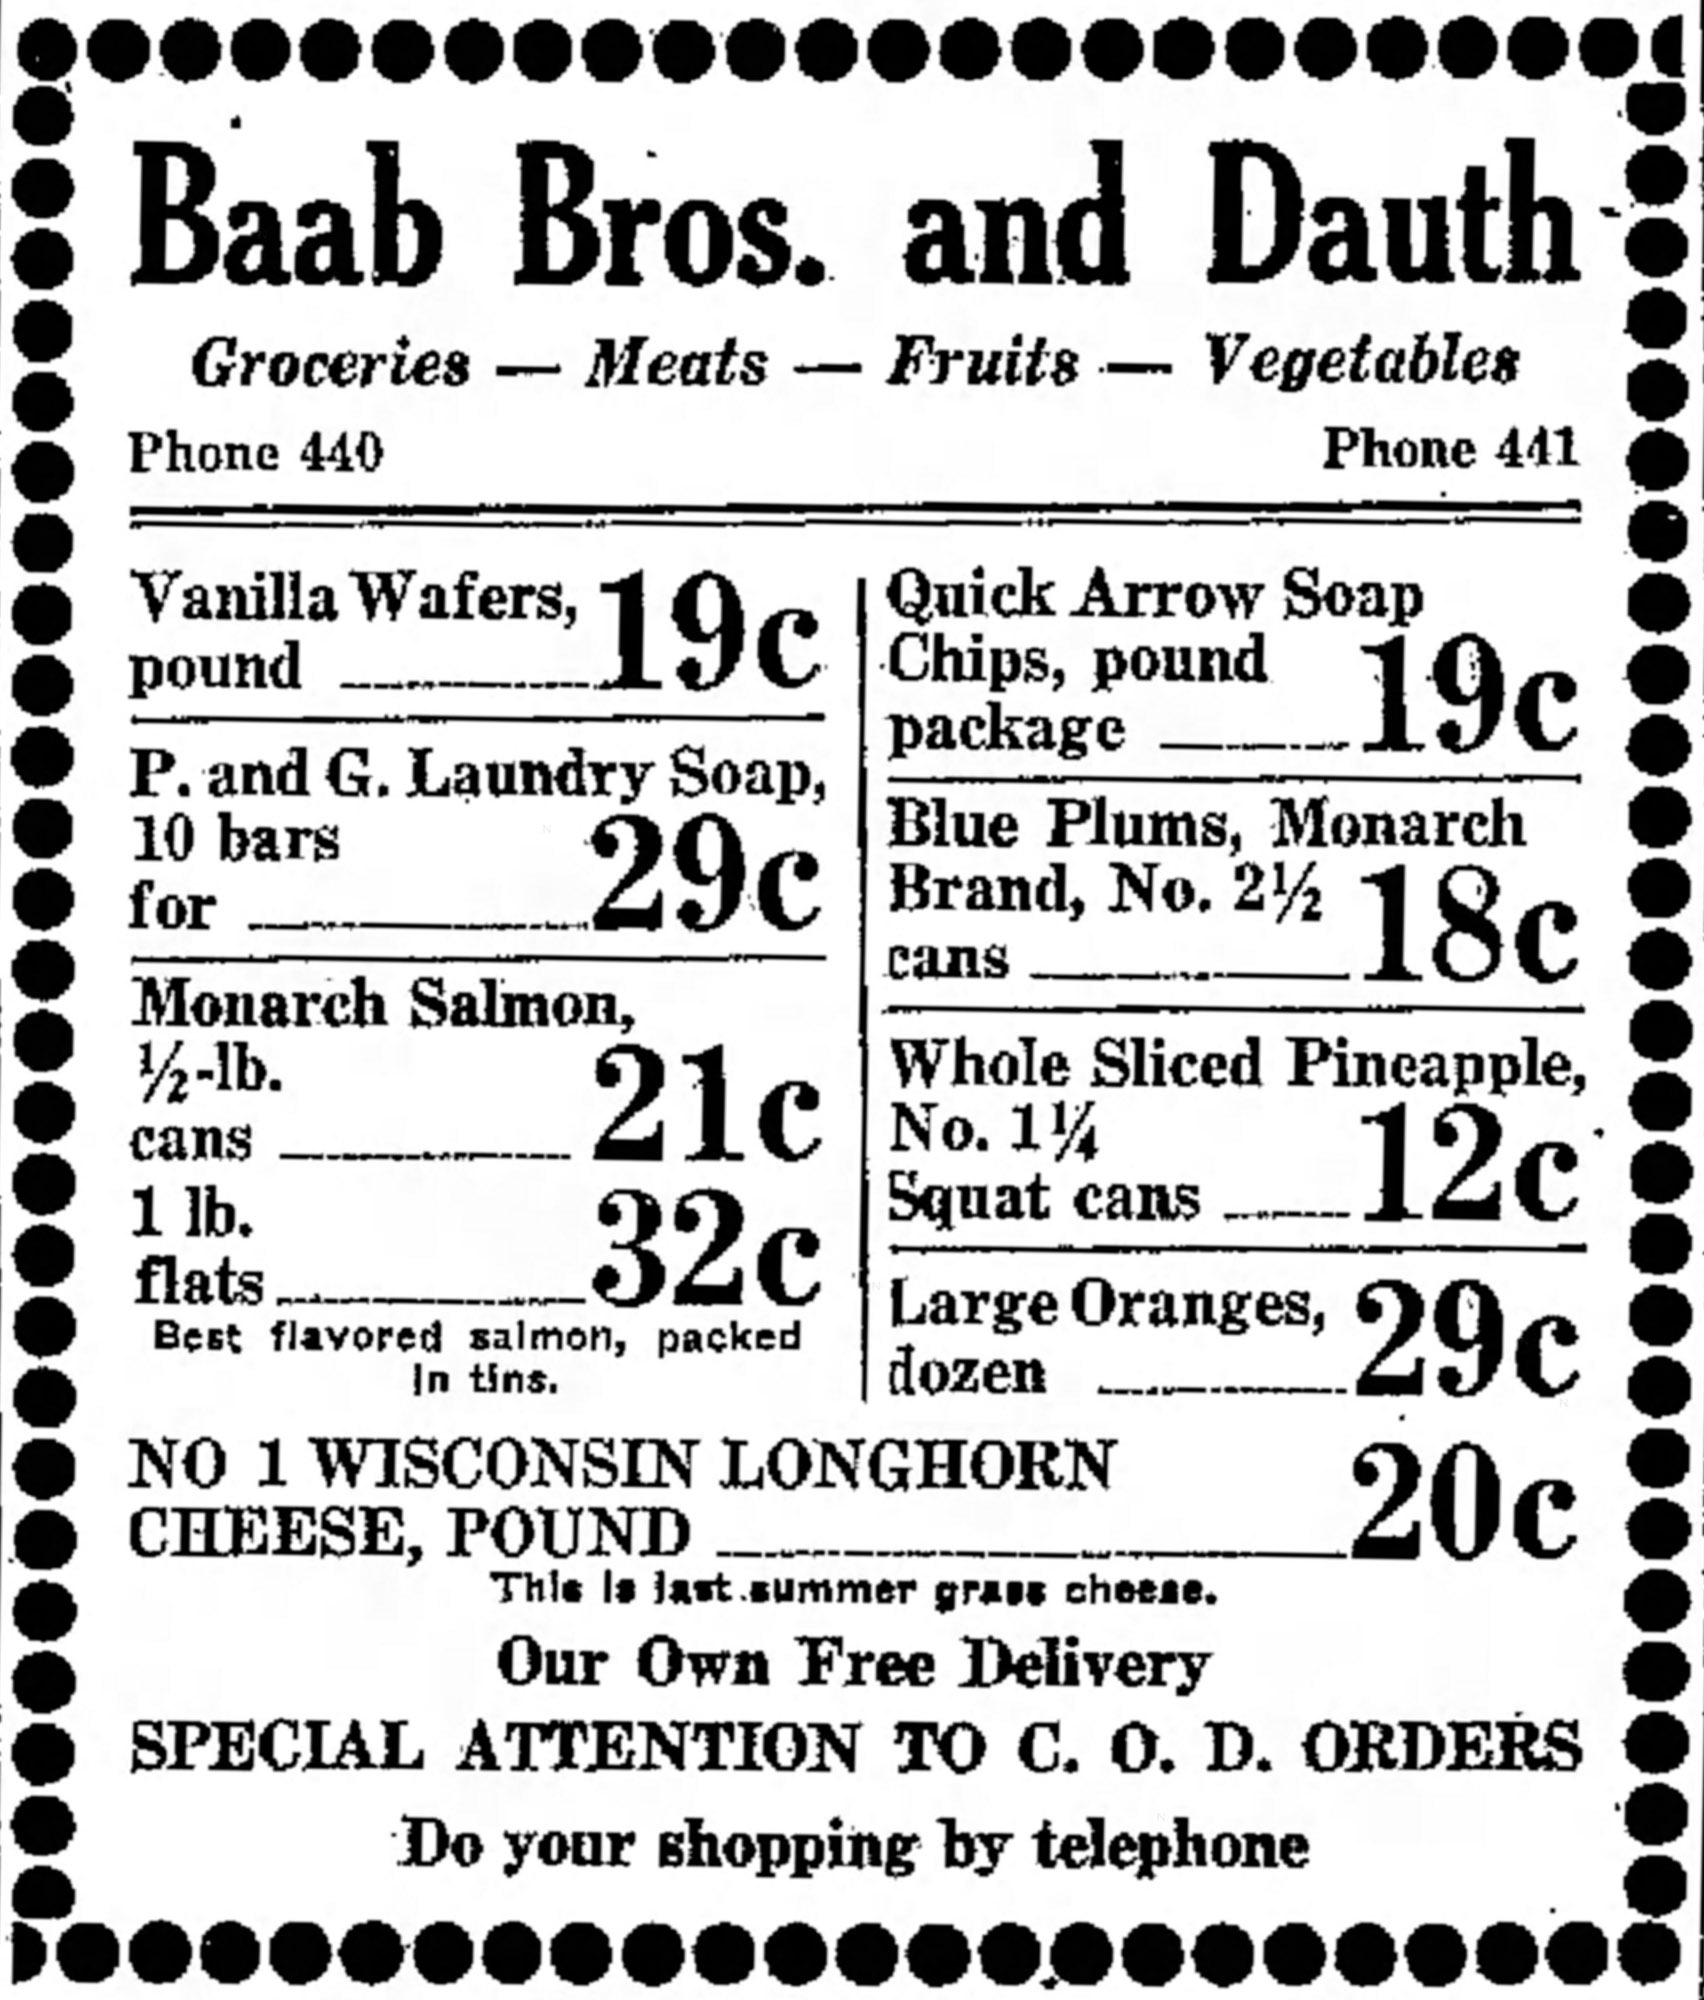 Dauth Family Archive - 1932-03-23 - Greeley Daily Tribune - Baab Bros and Dauth Advertisement